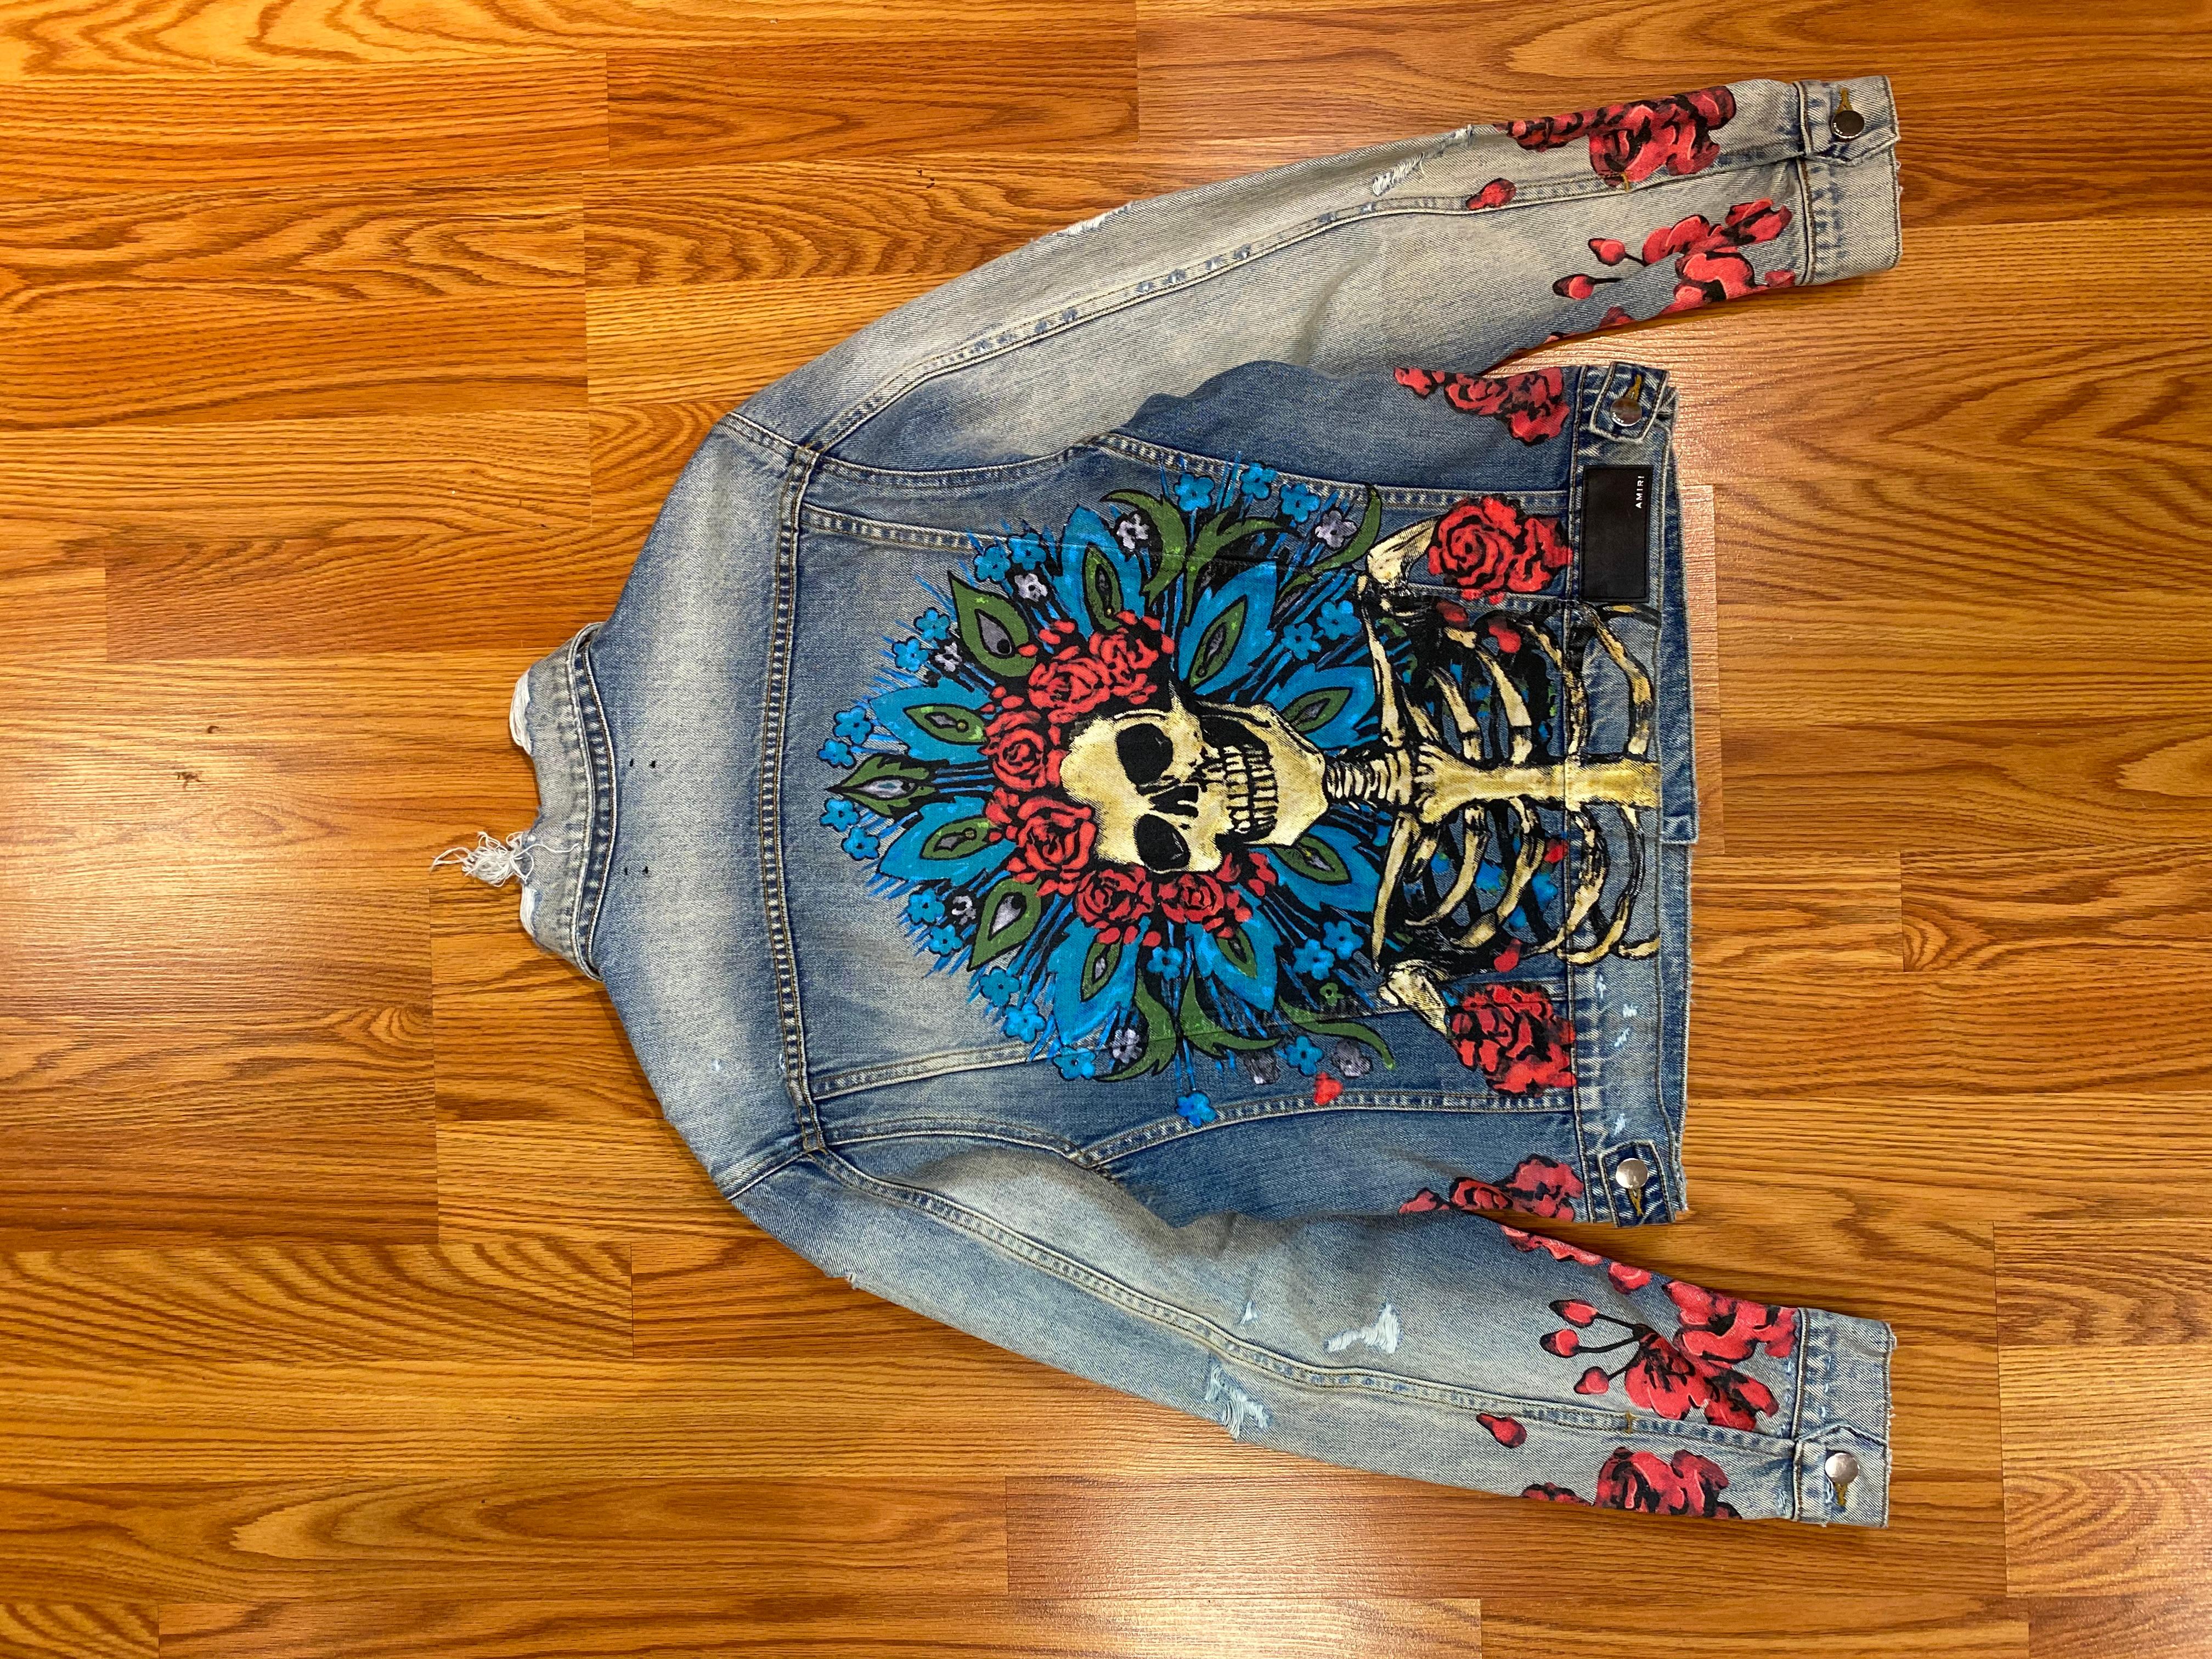 Amiri Denim Jacket
New w/ tags
Size Medium
Grateful Dead graphics
Extremely rare

Measurements:
Chest: 19.75”
Length: 24”
Shoulders: 18”

All sales are final